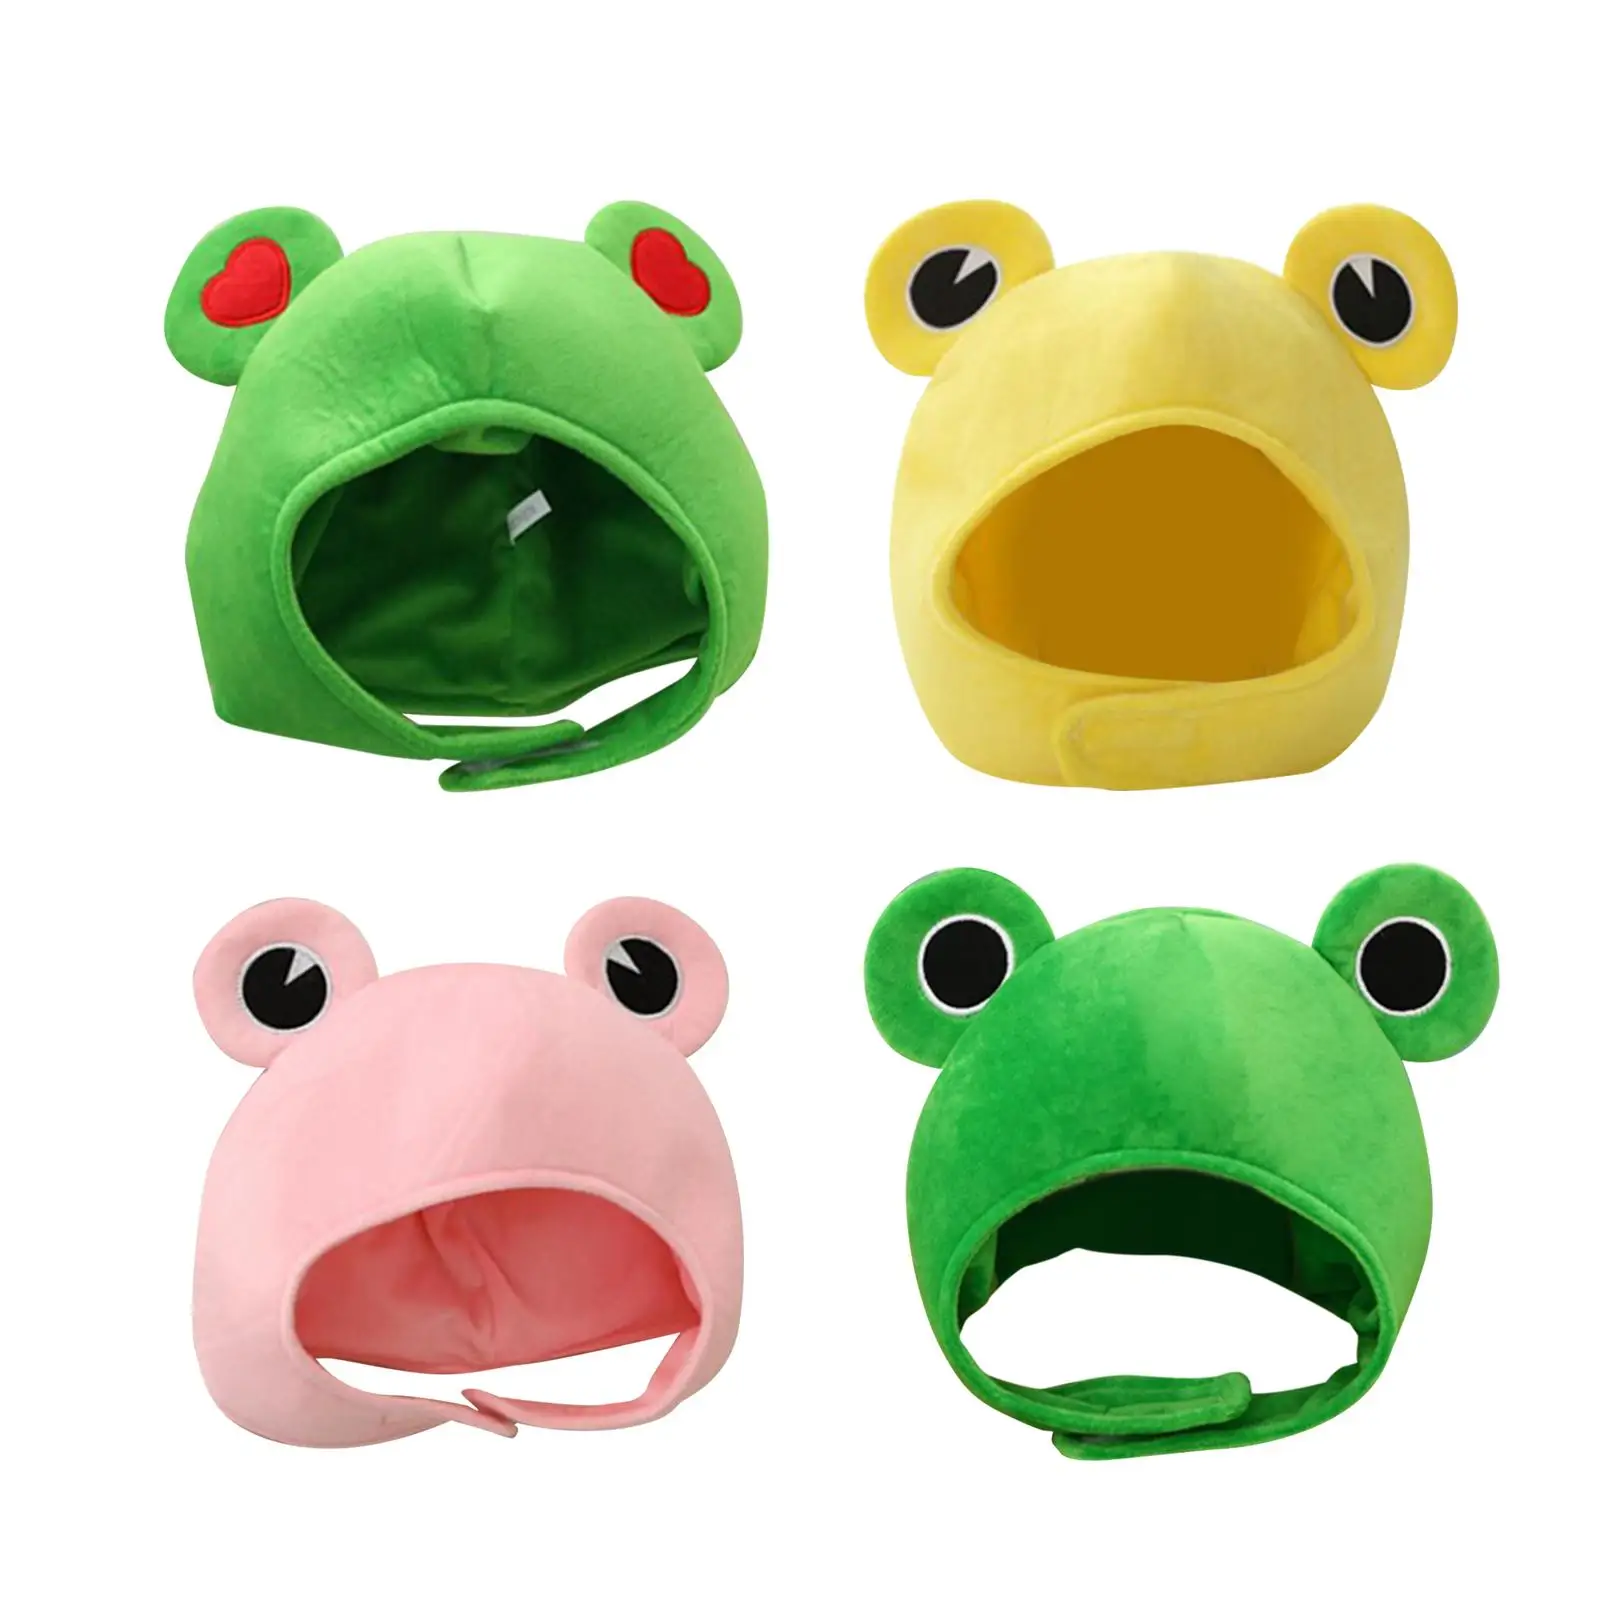 Plush Frog Hat Winter Cosplay Warm Dress up Headwear for Halloween Holiday Party